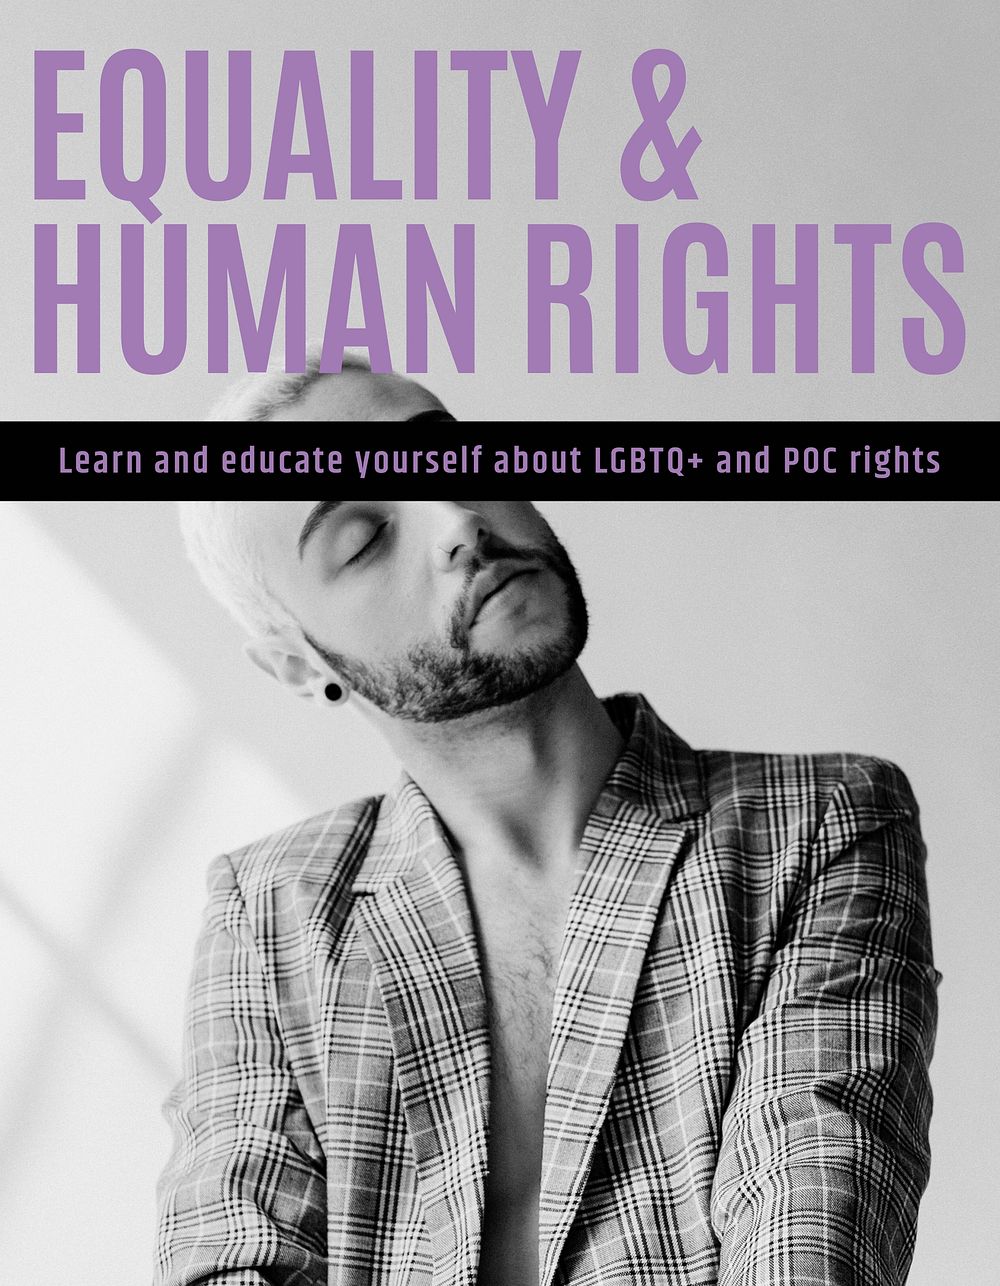 Human rights flyer editable template, LGBTQ, equality campaign psd